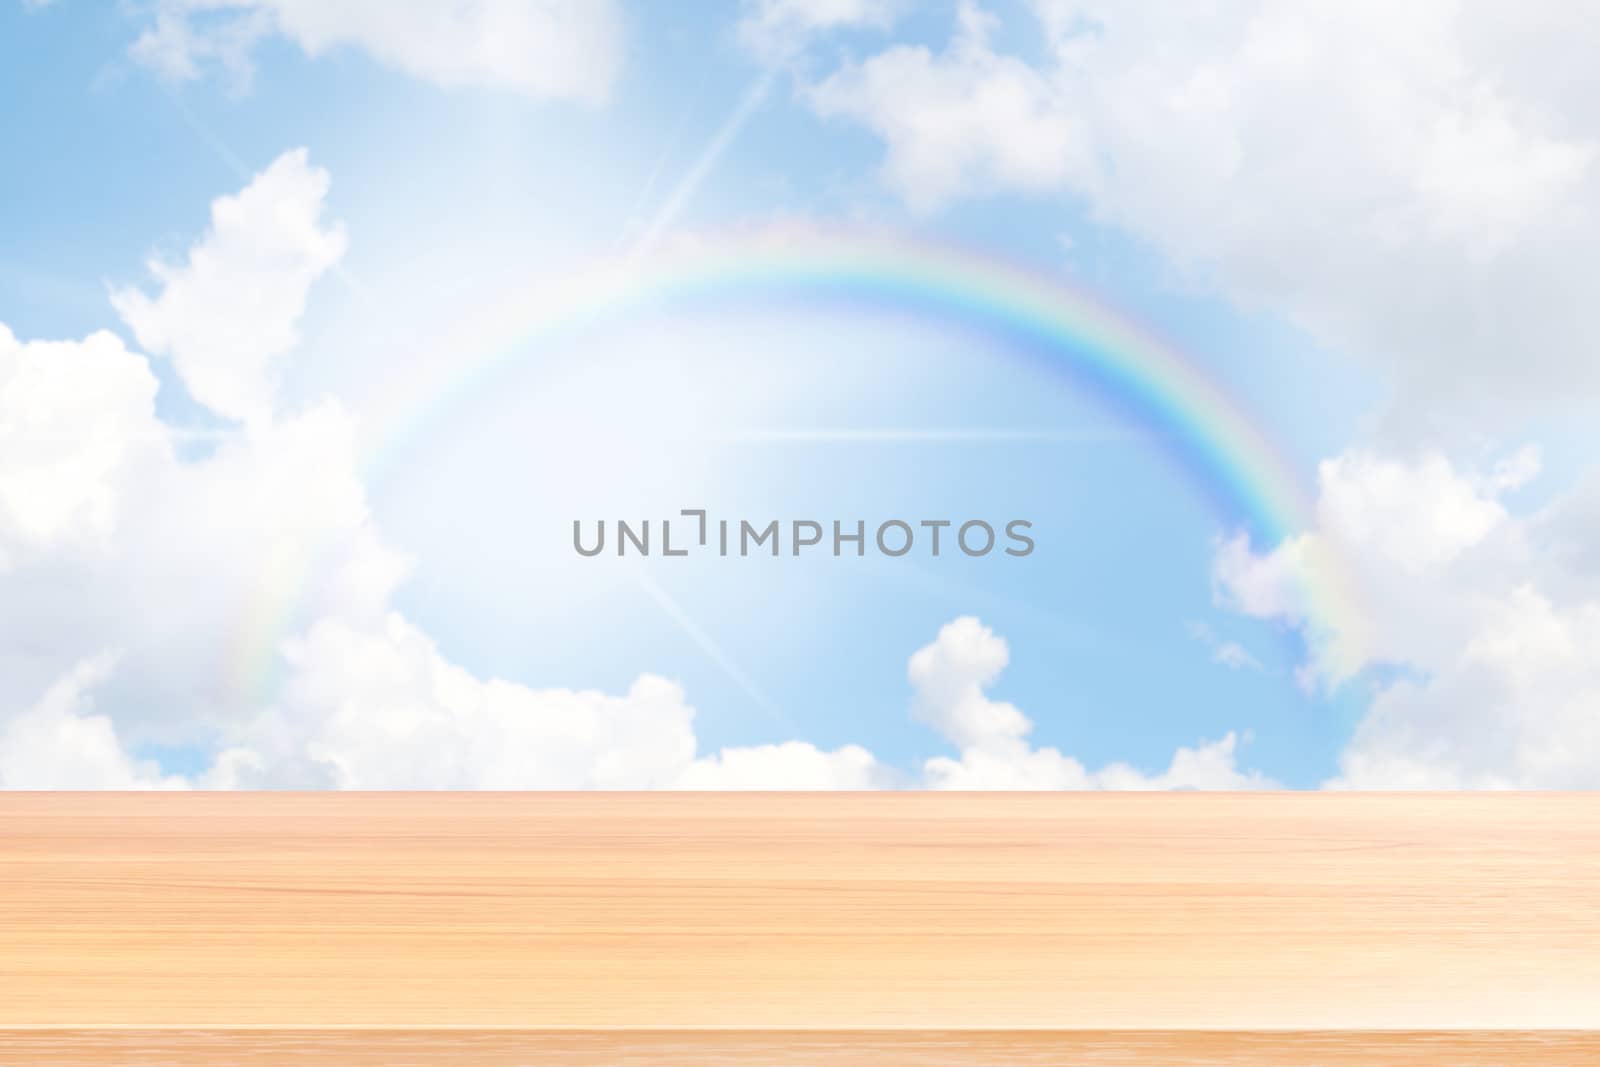 empty wood table floors on rainbow and blue sky background, wood table board empty front rainbows rings circle on sky, wooden plank blank over colorful rainbow in the sky for mock up display products by cgdeaw